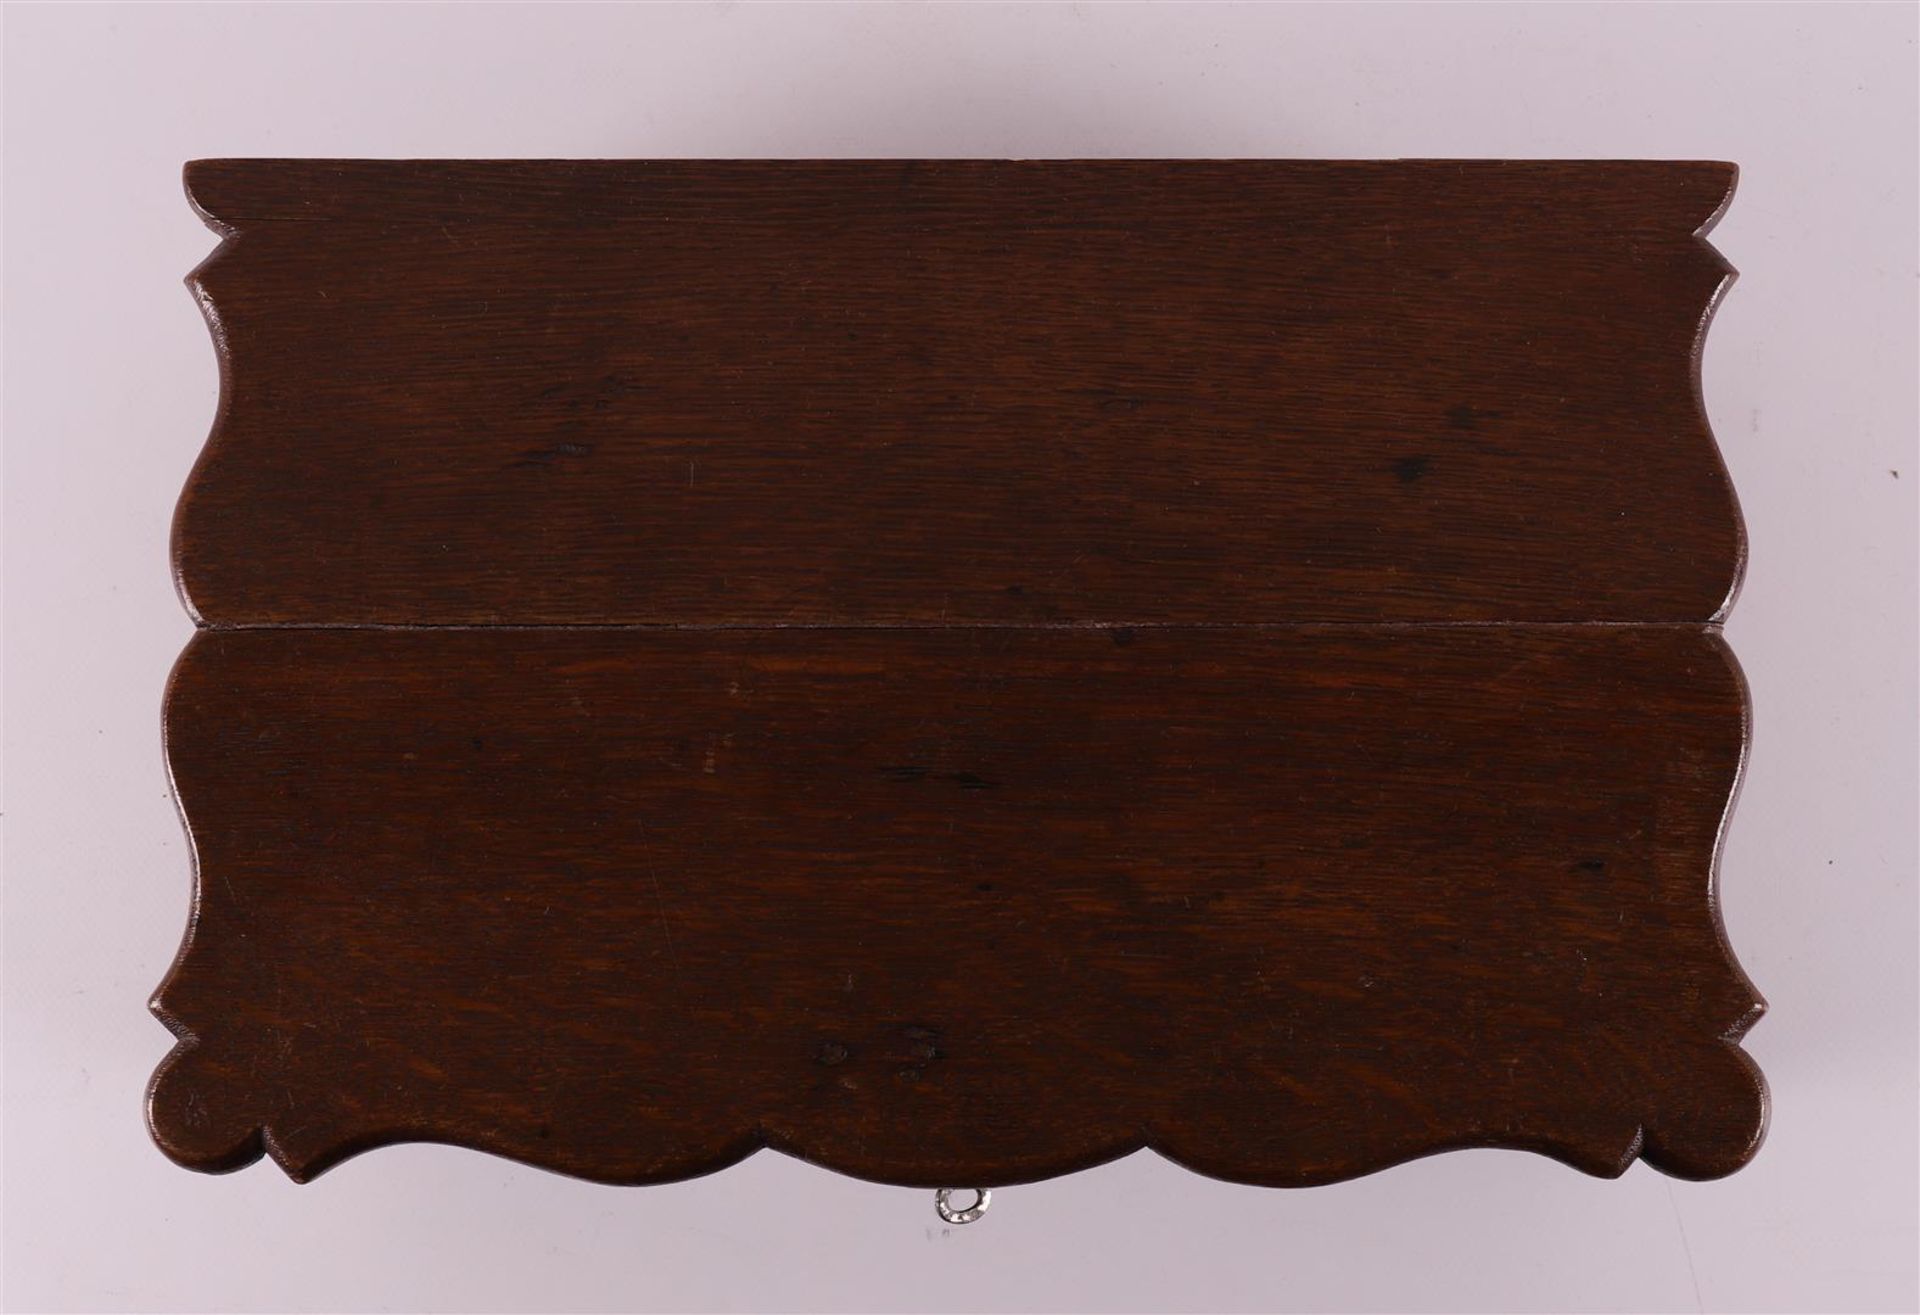 An organ-curved oak document box, 18th century. - Image 4 of 5